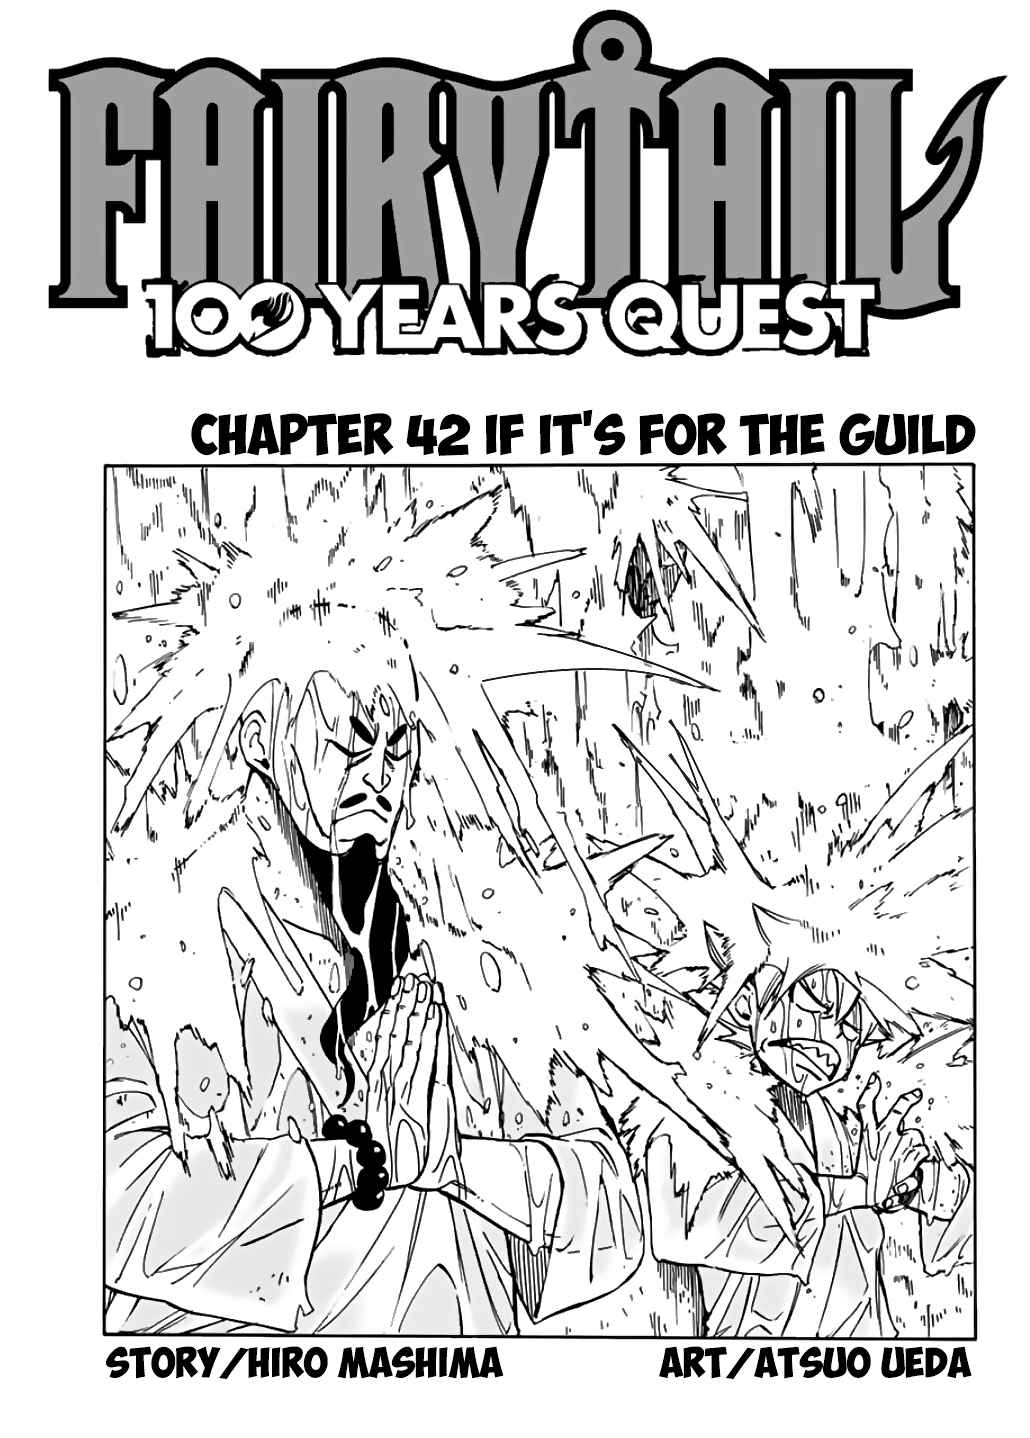 Fairy Tail: 100 Years Quest Ch. 42 If It’s for the Guild